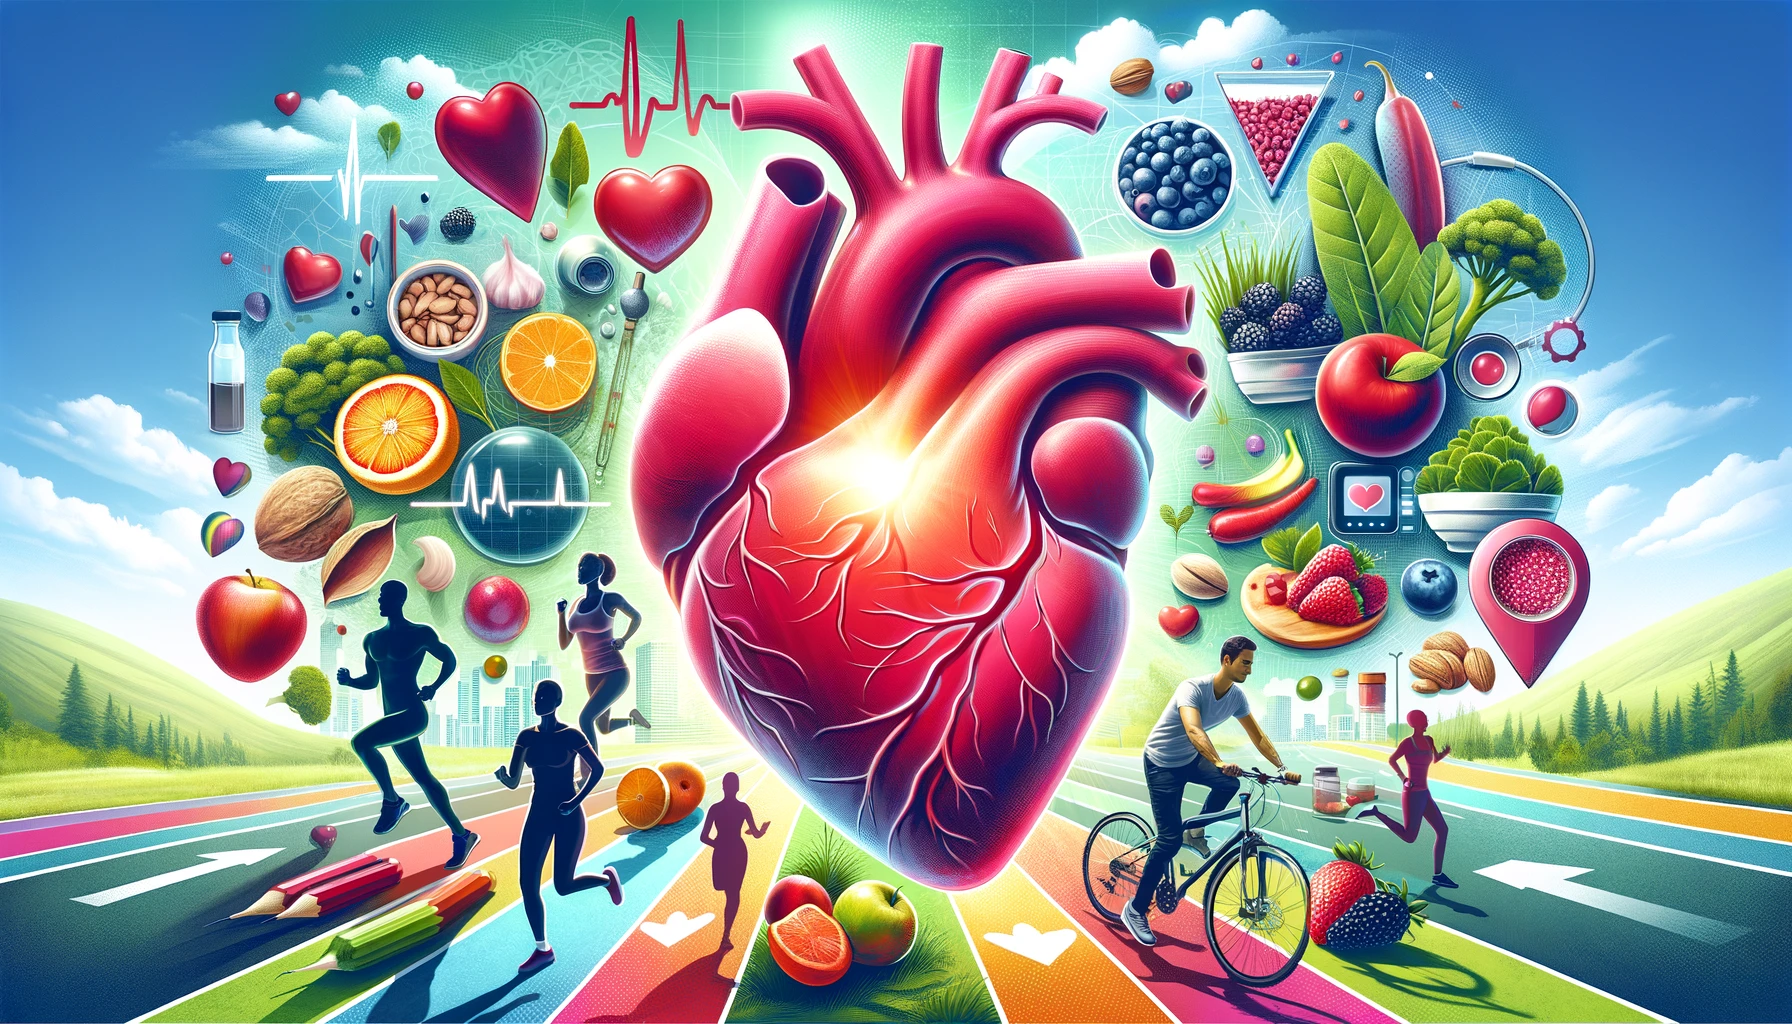  Heart health concept image with diverse people engaging in healthy activities, from Healthy Life - New Start blog.